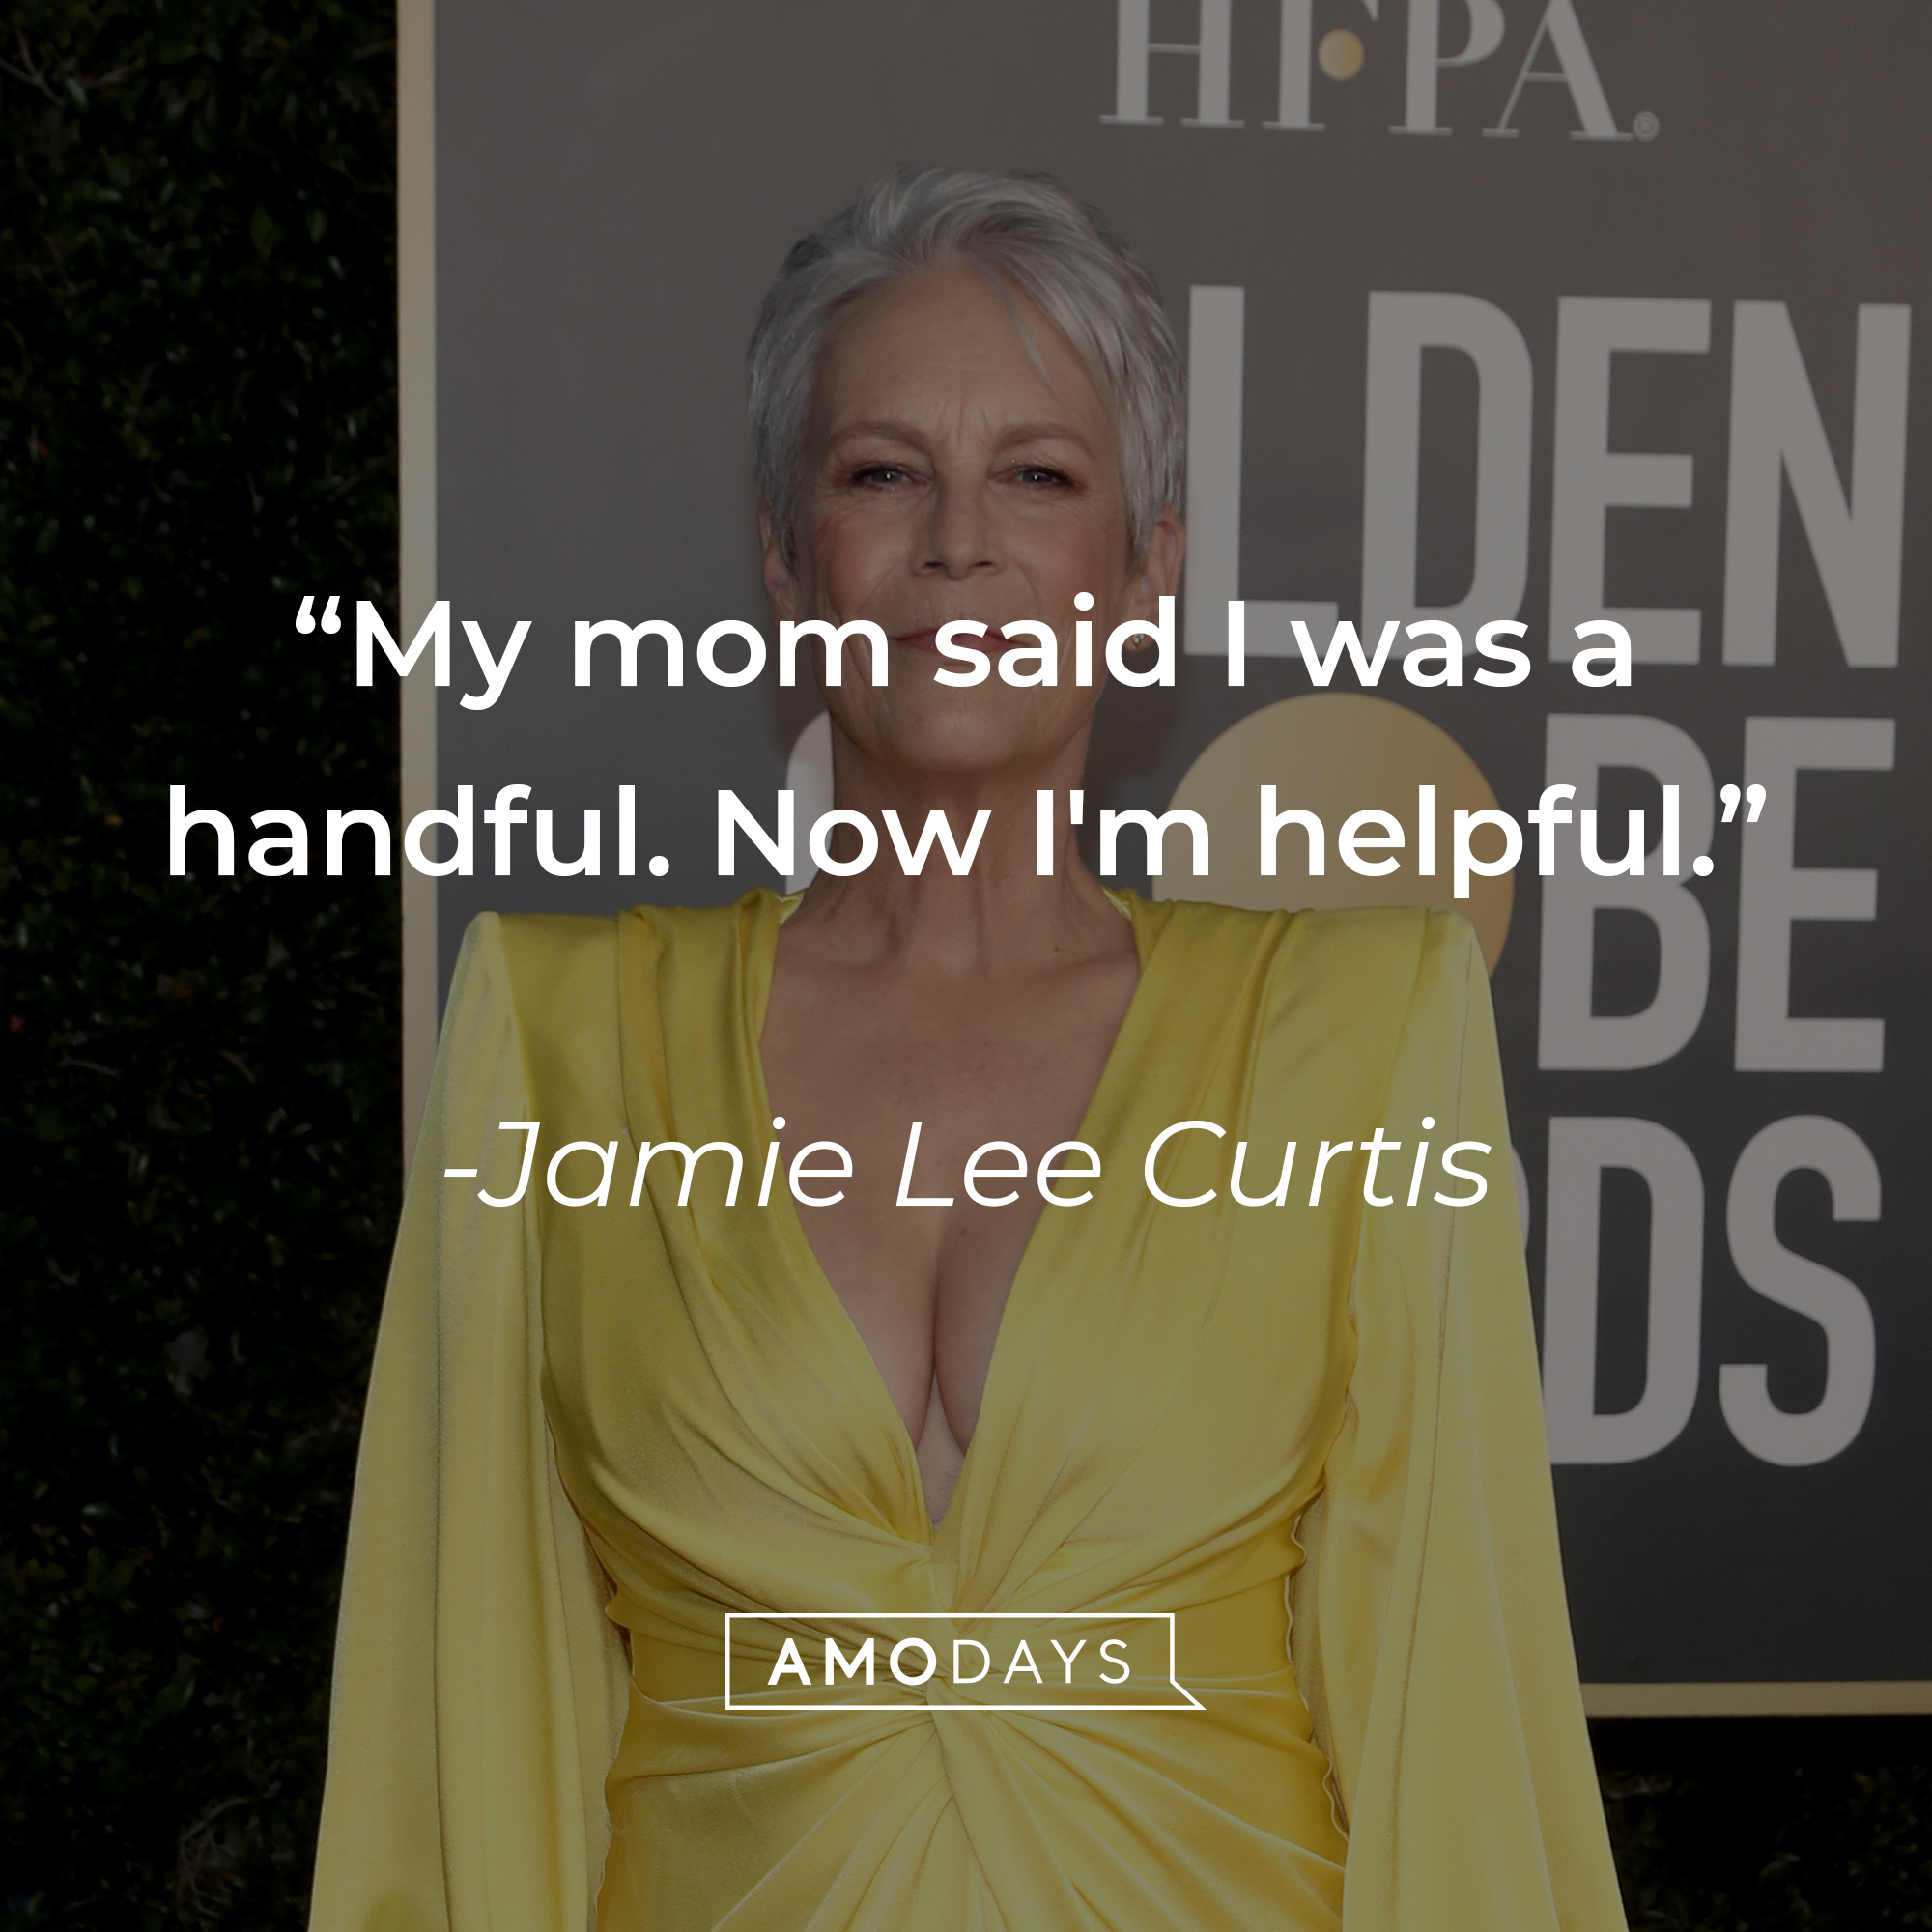 An image of Jamie Lee Curtis, with her quote: “My mom said I was a handful. Now I'm helpful.”  | Source: Getty Images